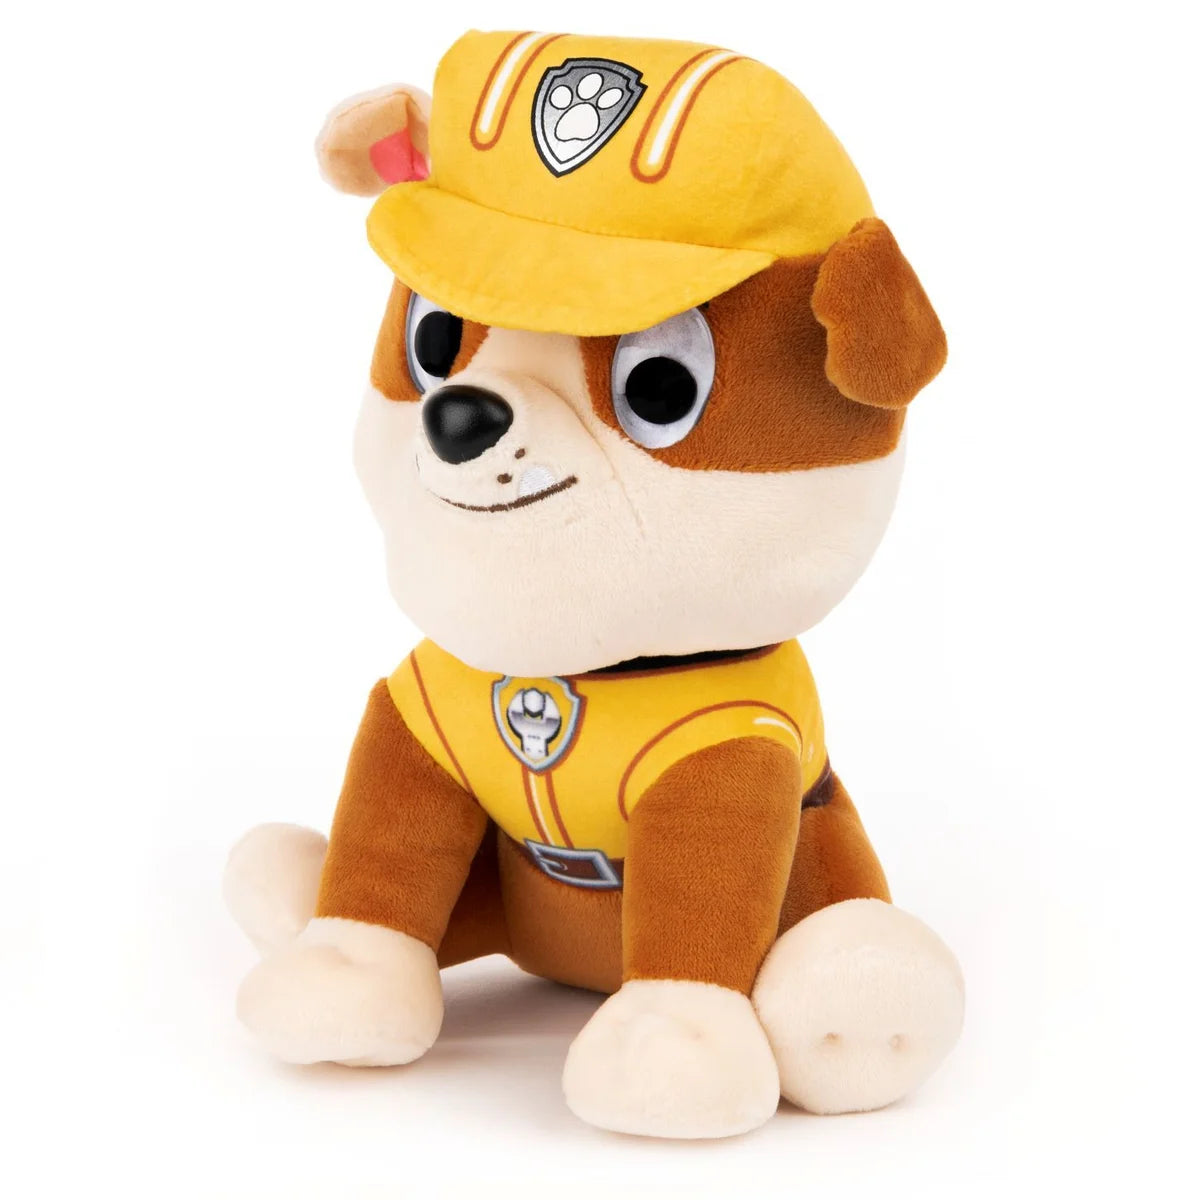 GUND Paw Patrol Rubble in Signature Construction Uniform for Ages 1 and Up, 9” - Plush Toys Heretoserveyou